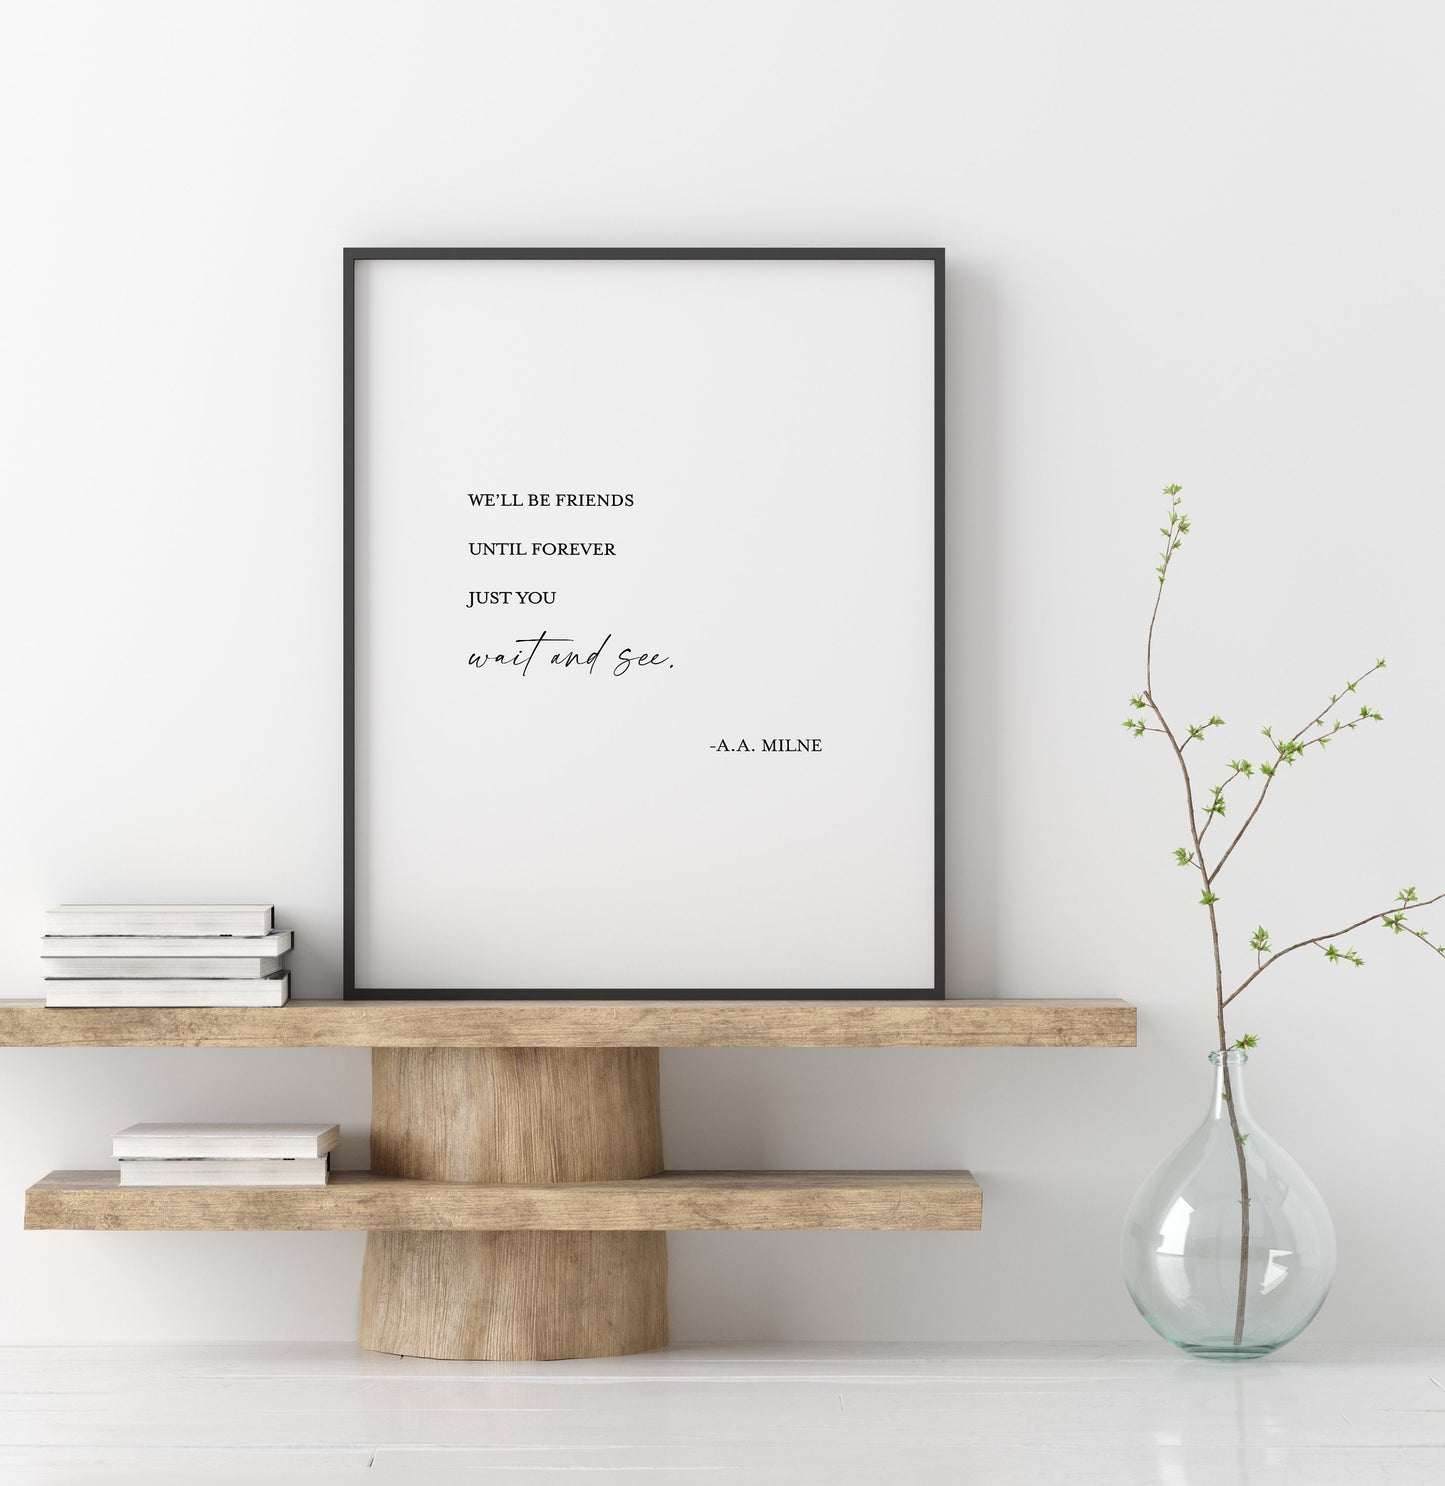 We’ll be friends until forever,AA Milne print,Gift for friend,Friendship quote,Going away gift,Friends forever,Best friend gift,Friend gift